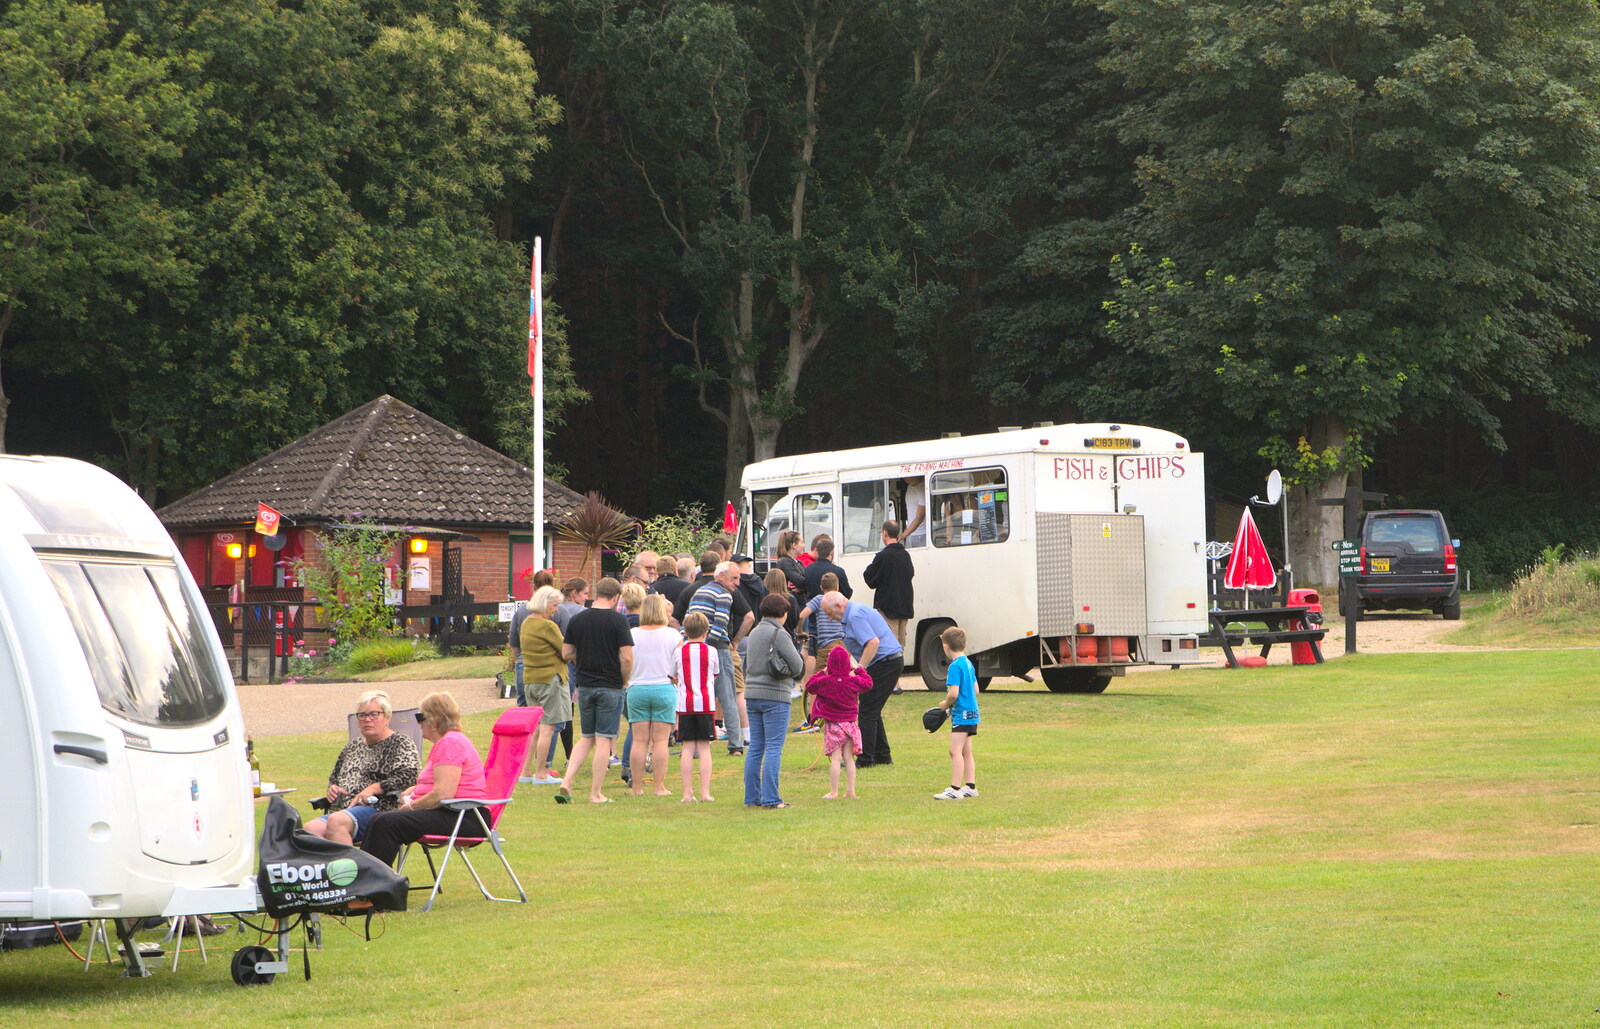 An epic queue for the chip van soon builds up from Camping in West Runton, North Norfolk - 30th July 2016